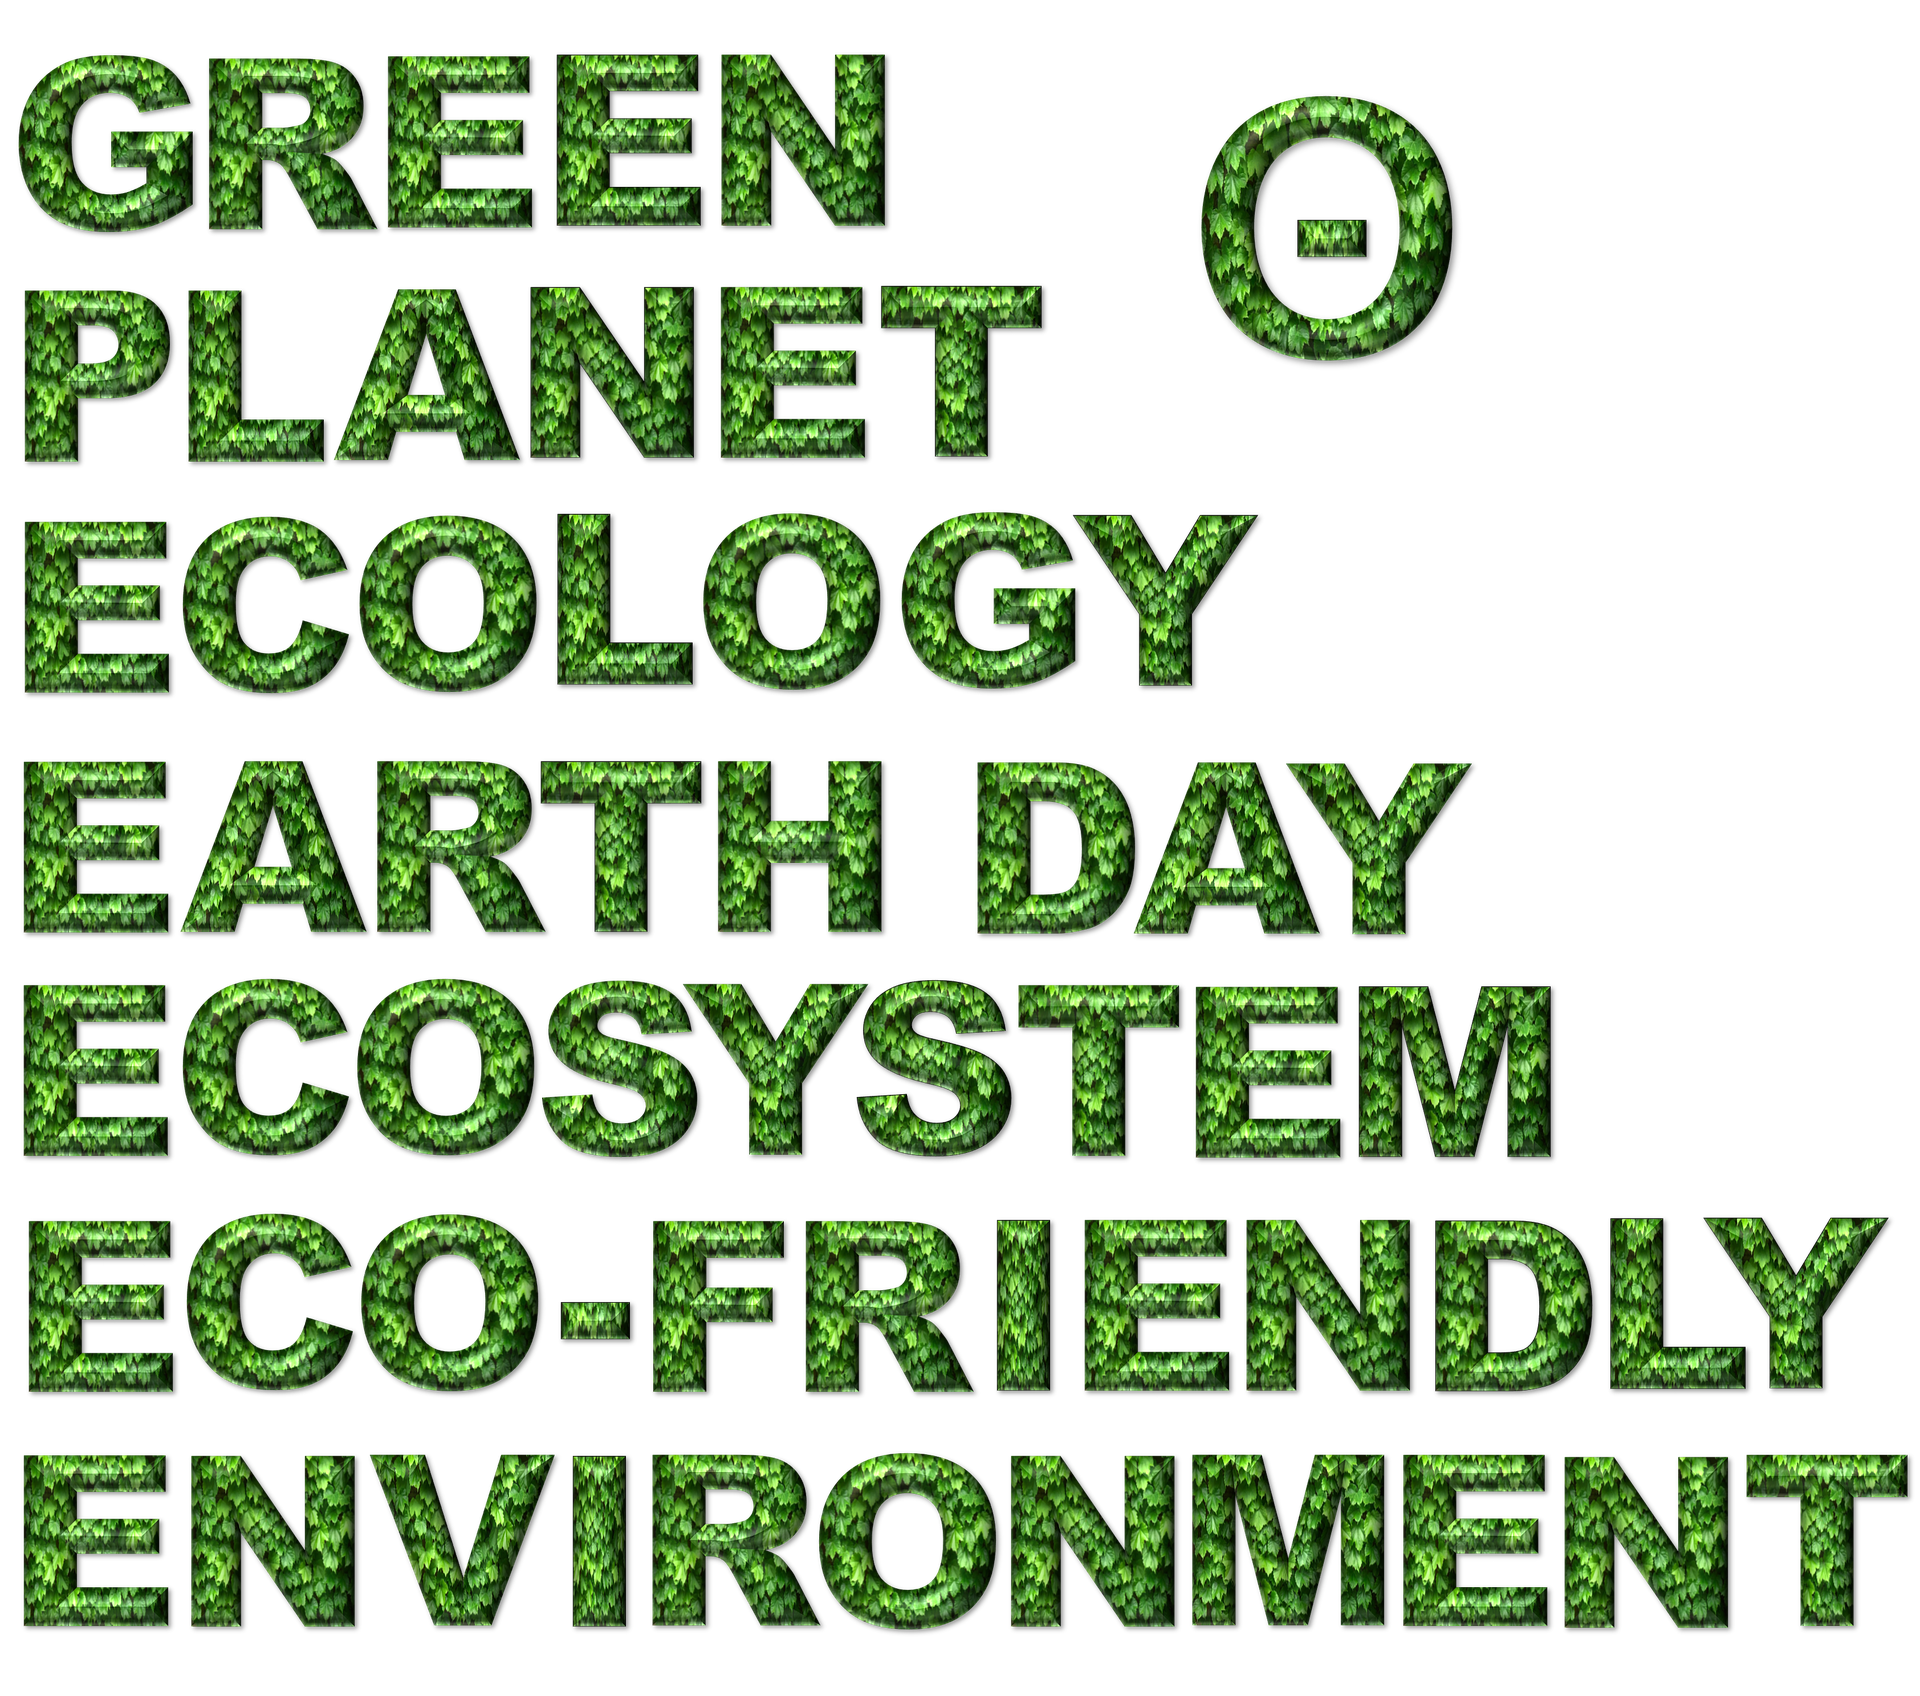 enbironment, earth day, ecology, planting plants, eco-friendly, green